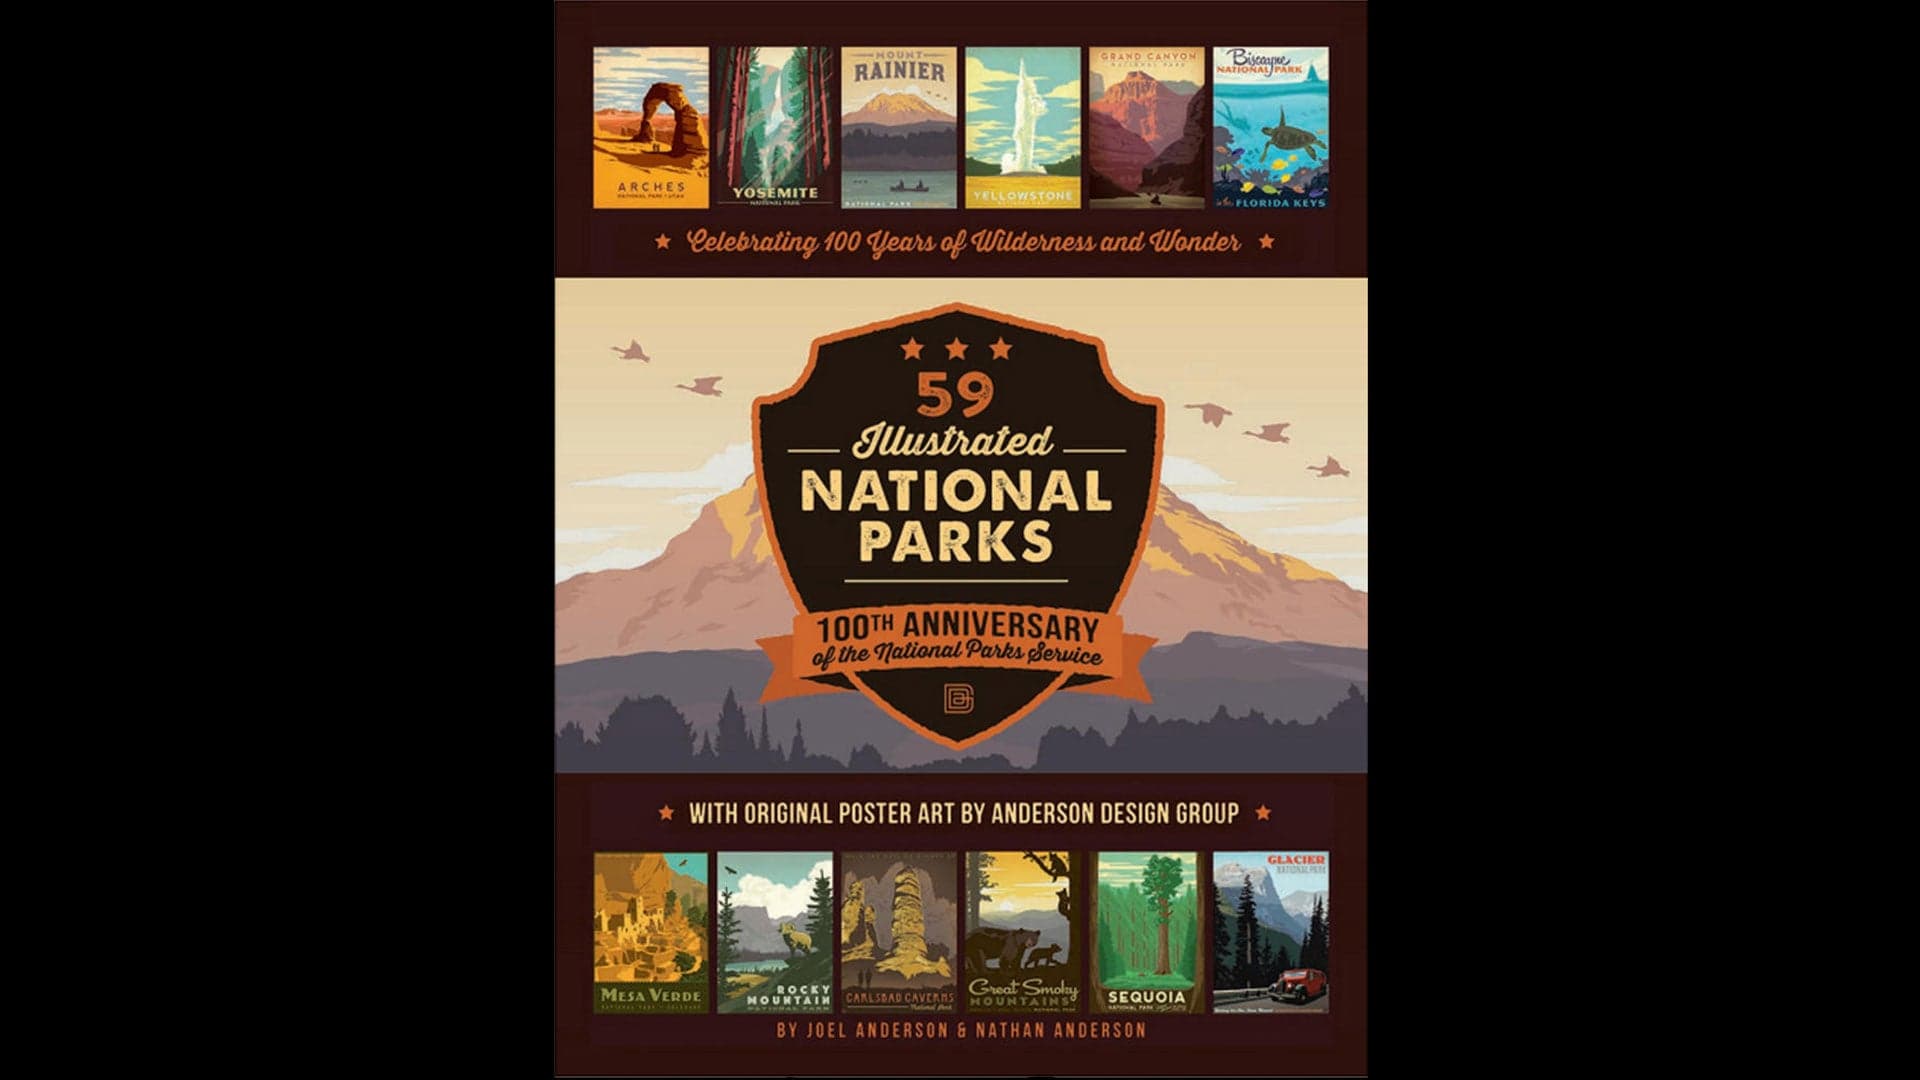 59 Illustrated National Parks is Road Trip Inspiration